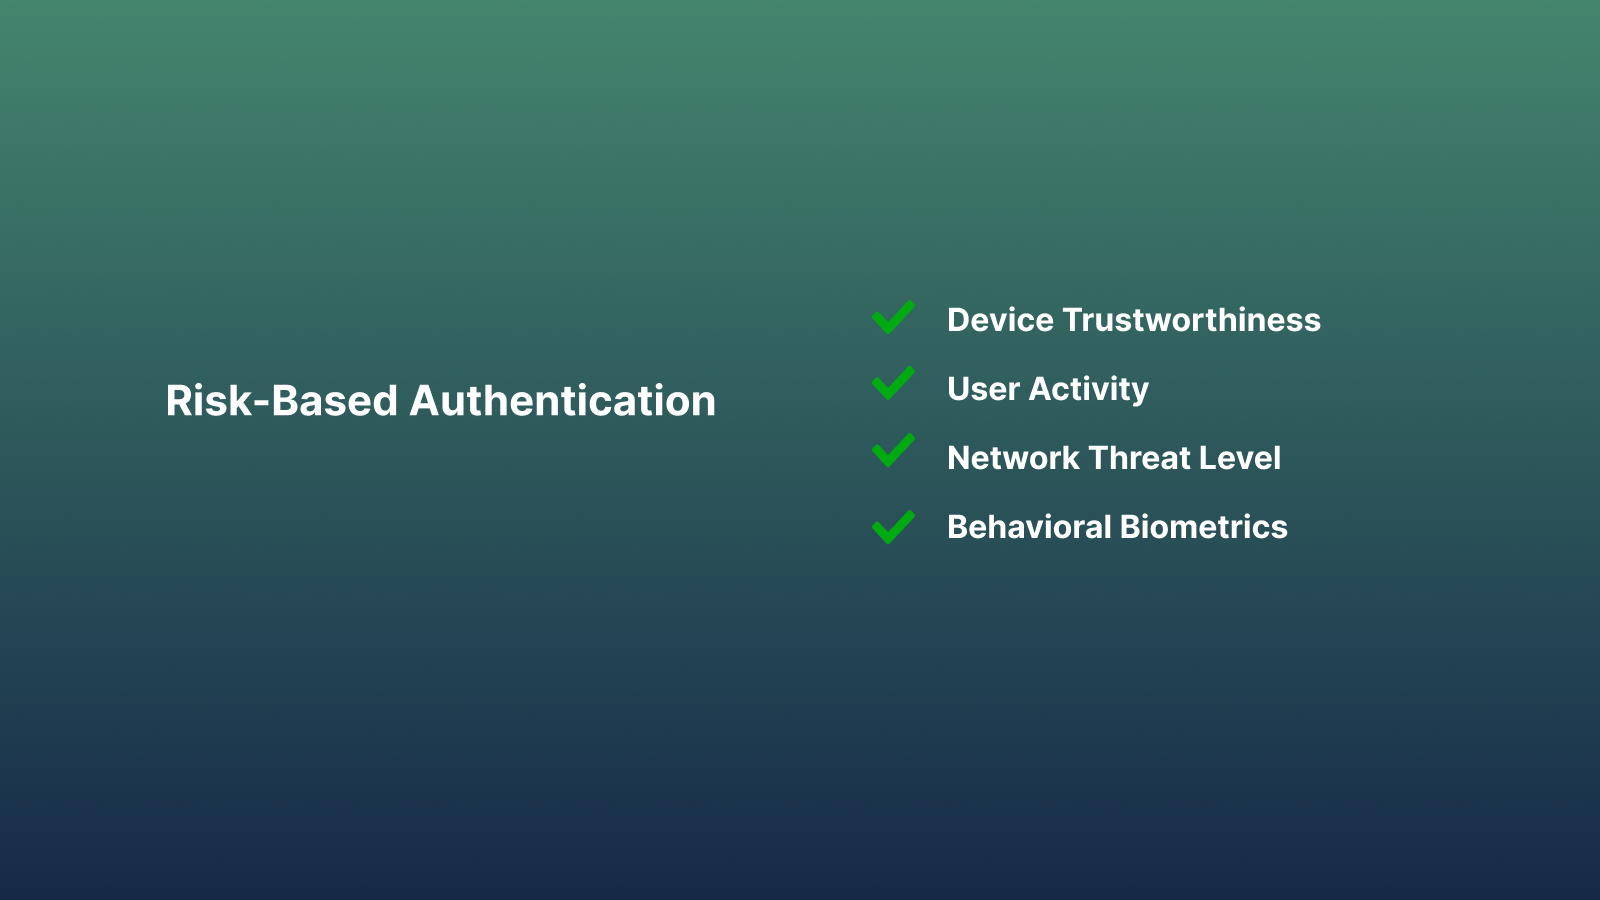 Knowledge: Benefits of risk-based authentication